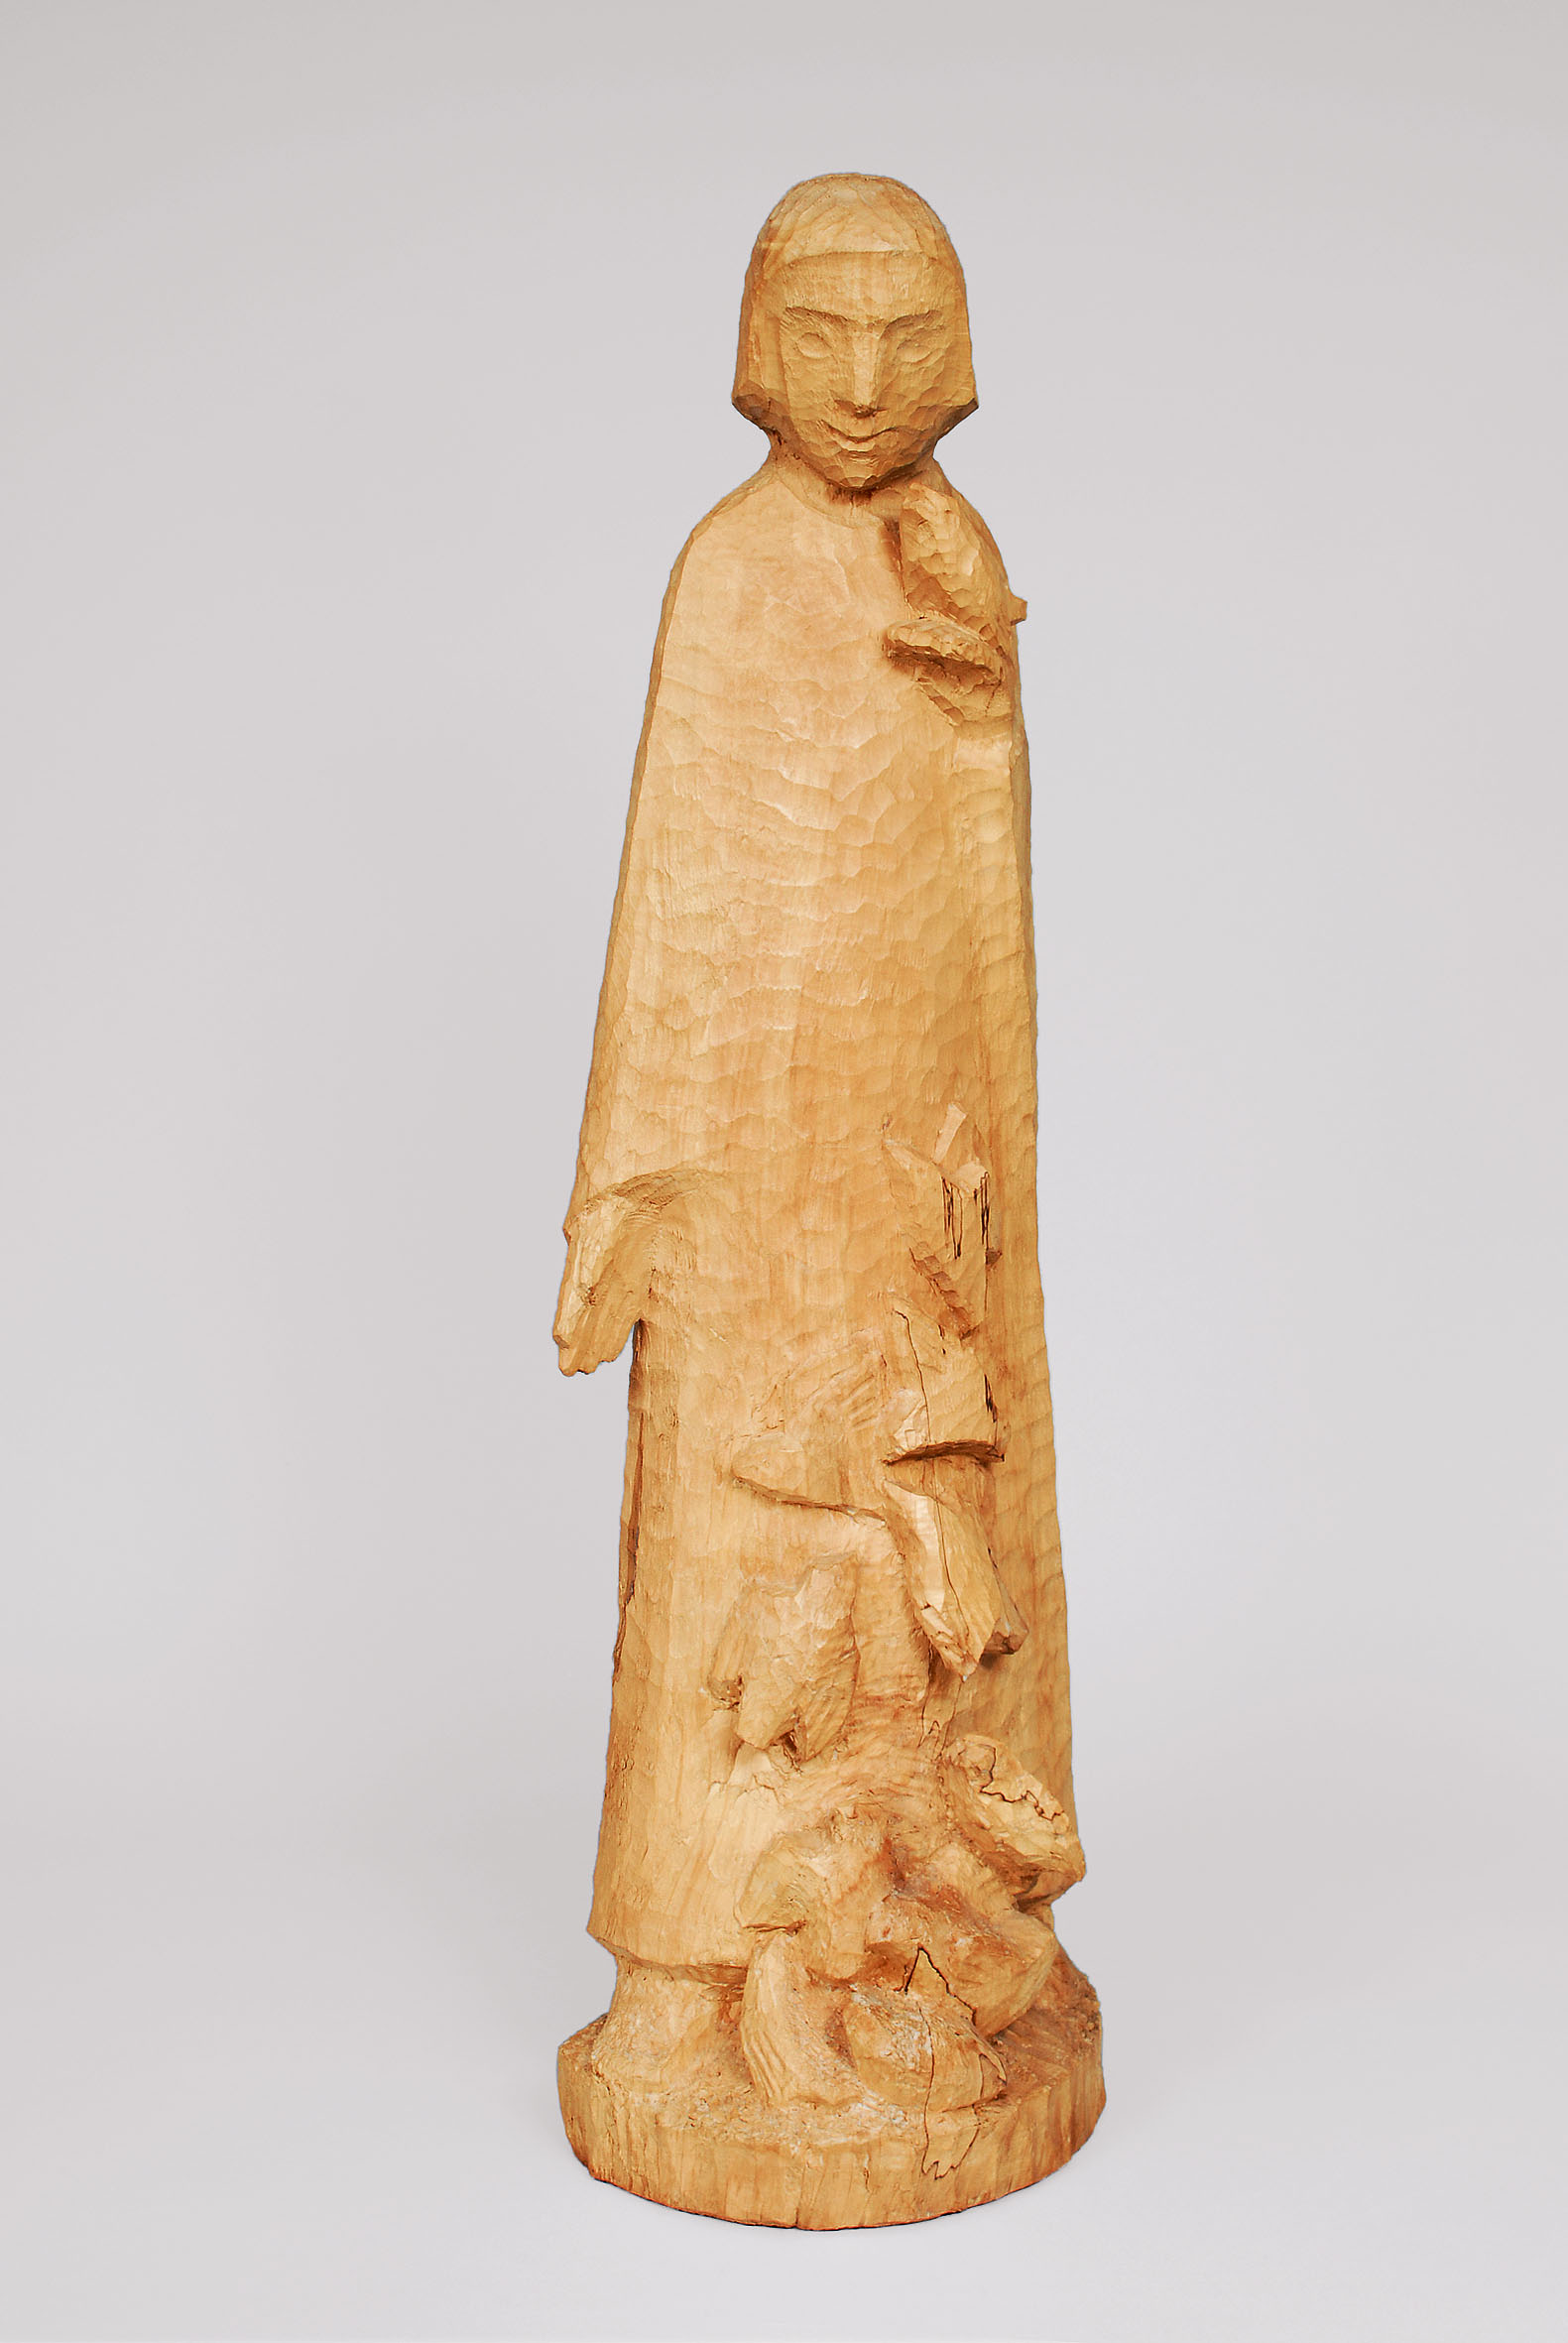 A wood sculpture 'St. Francis of Assisi'